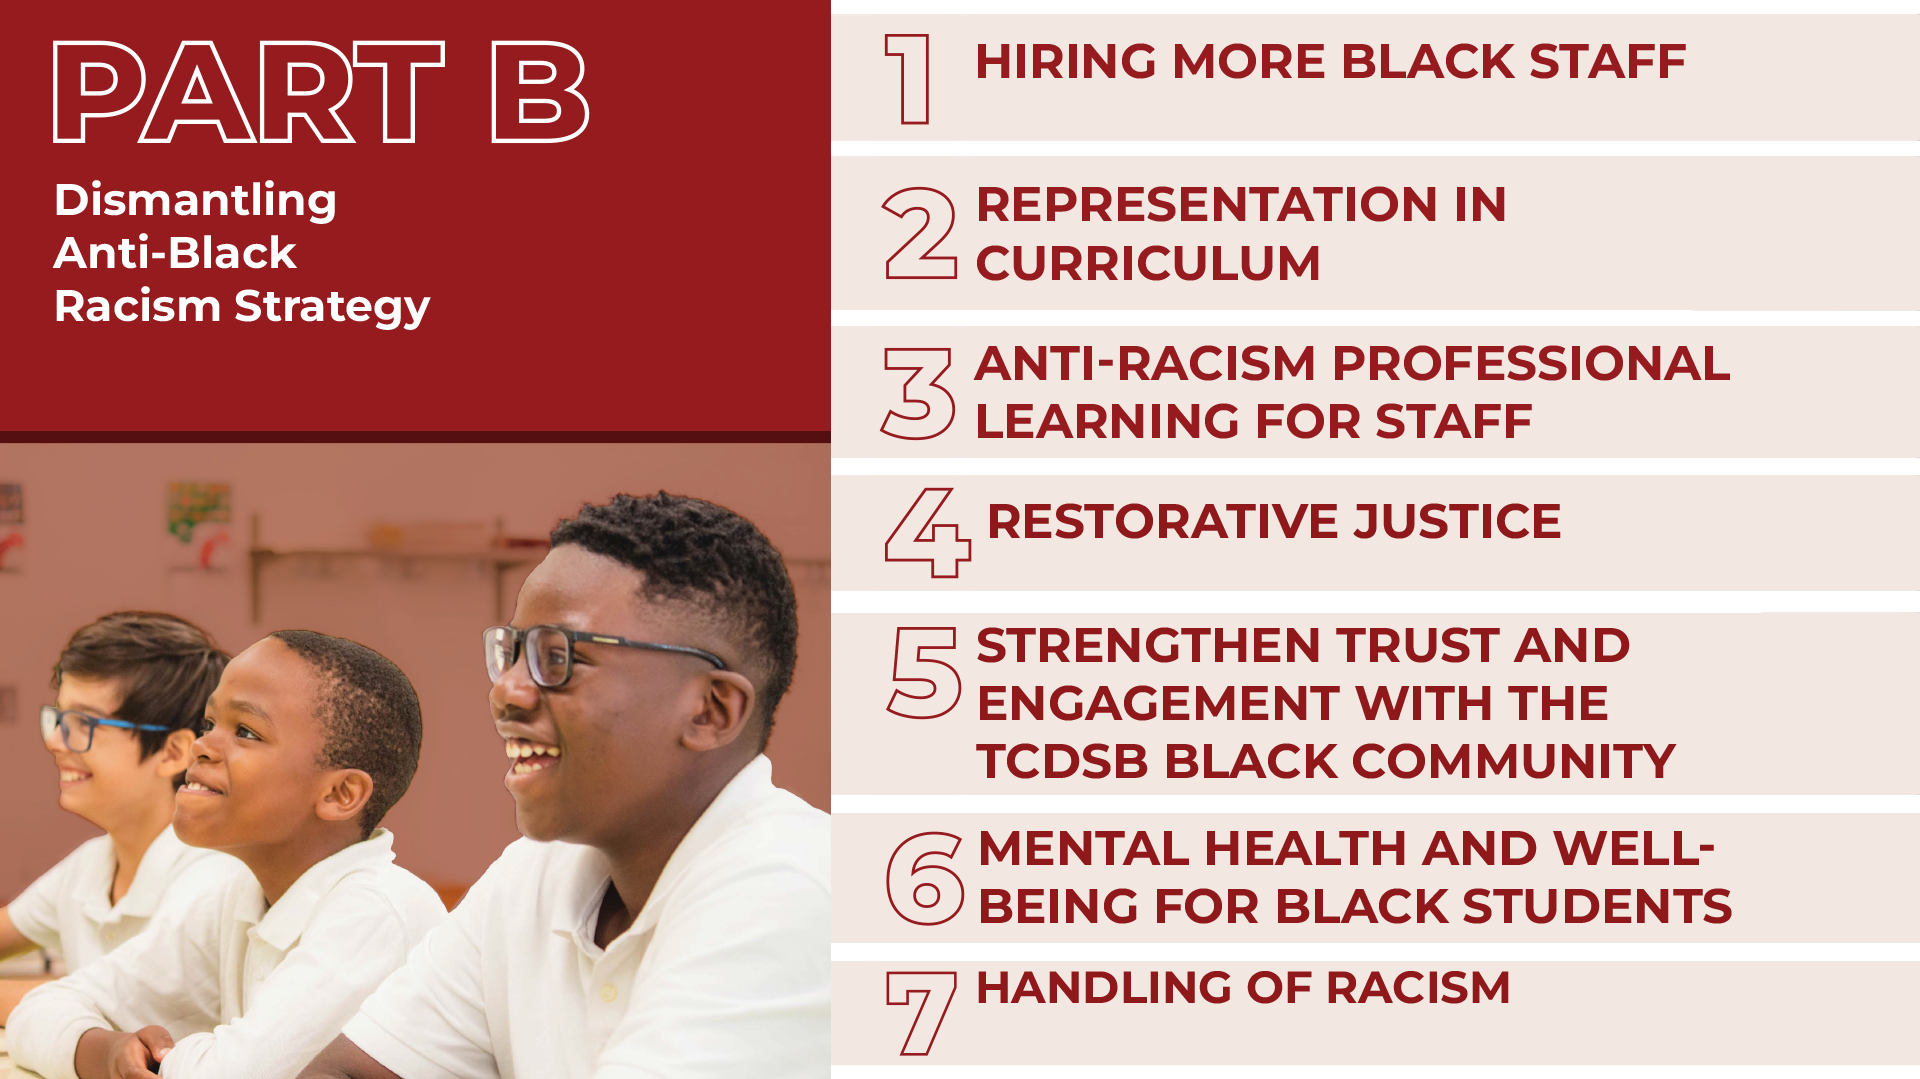 Part B - Dismantling Anti-Black Racism Strategy - 1. HIRING MORE BLACK STAFF - 2. REPRESENTATION IN CURRICULUM - 3. ANTI-RACISM PROFESSIONAL LEARNING FOR STAGG - 4. RESTORATIVE JUSTICE - 5. STRENGTHEN TRUST AND ENGAGEMENT WITH THE TCDSB BLACK COMMUNITY - 6. MENTAL HEALTH AND WELLBEING FOR BLACK STUDENTS - 7. HANDLING OF RACISM